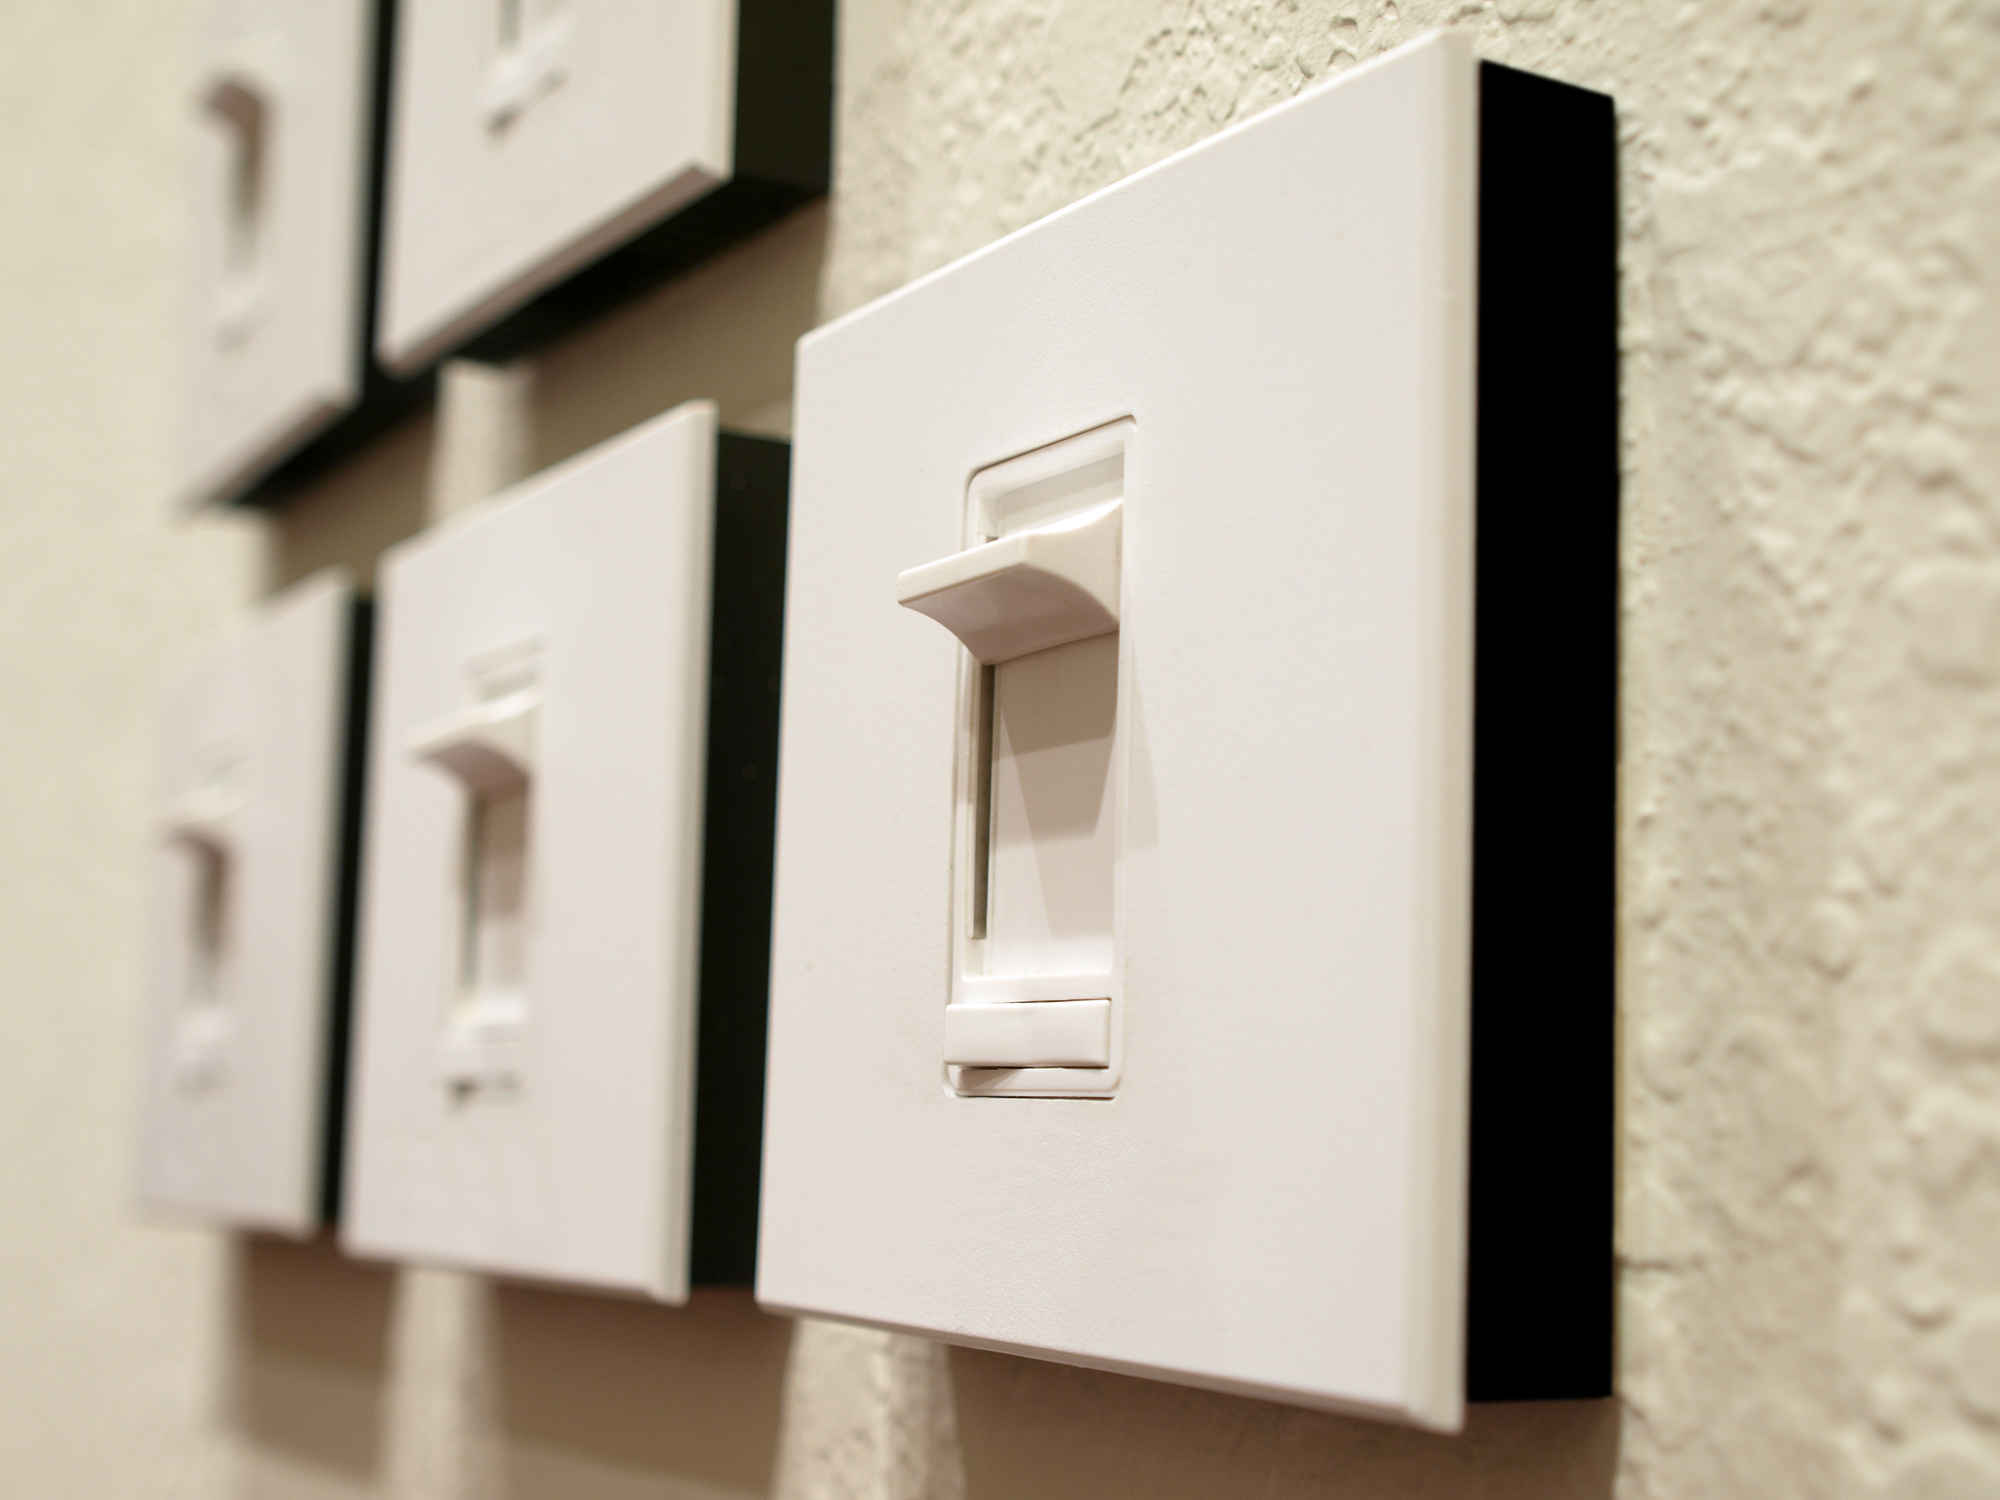 Installing Dimmer Light Switches